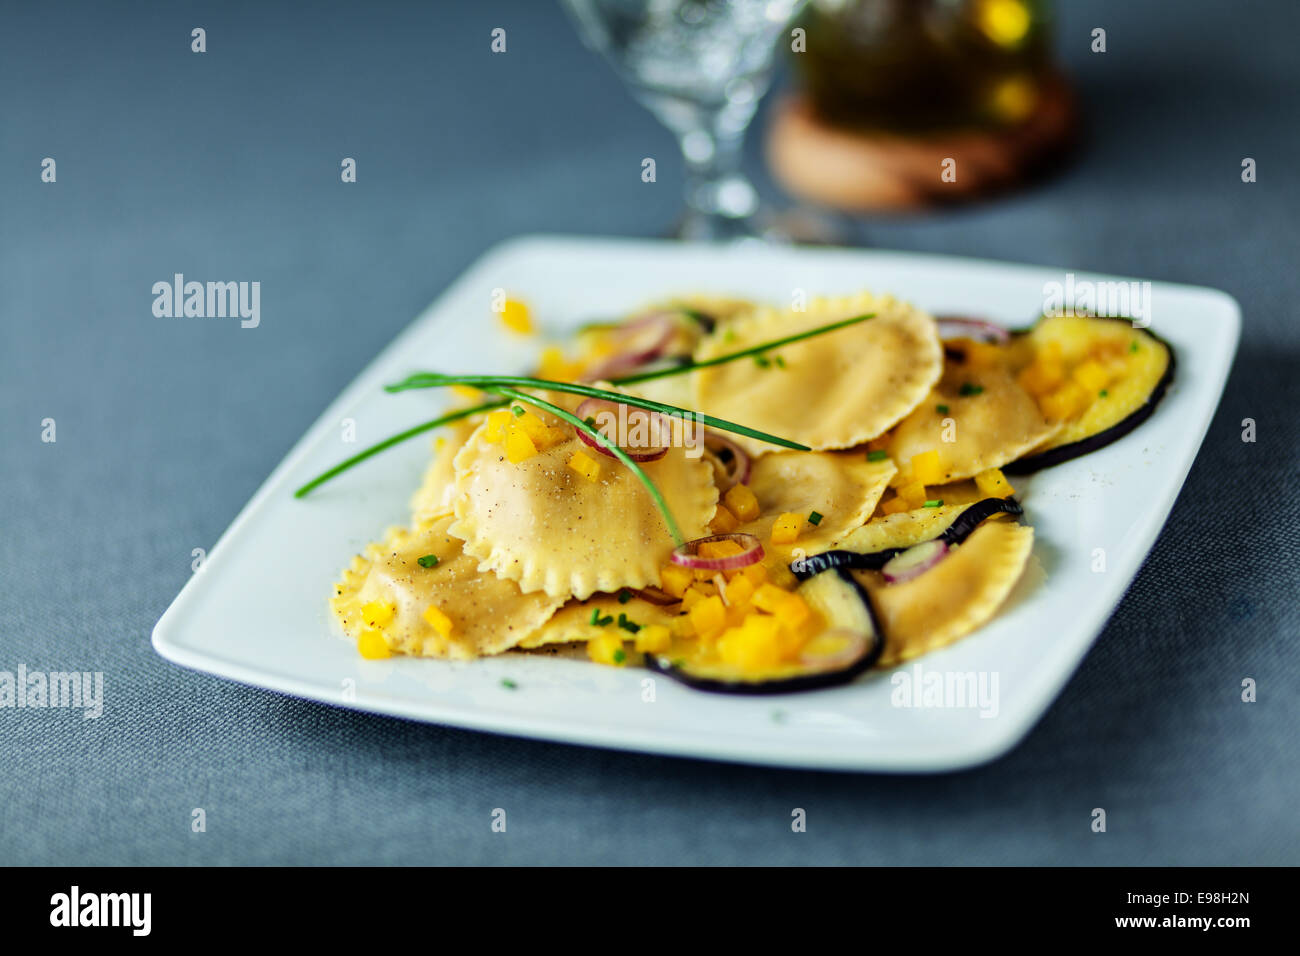 Vegetarian Italian ravioli pasta with grilled or roasted slices of eggplant or aubergine served on a modern square plate topped Stock Photo